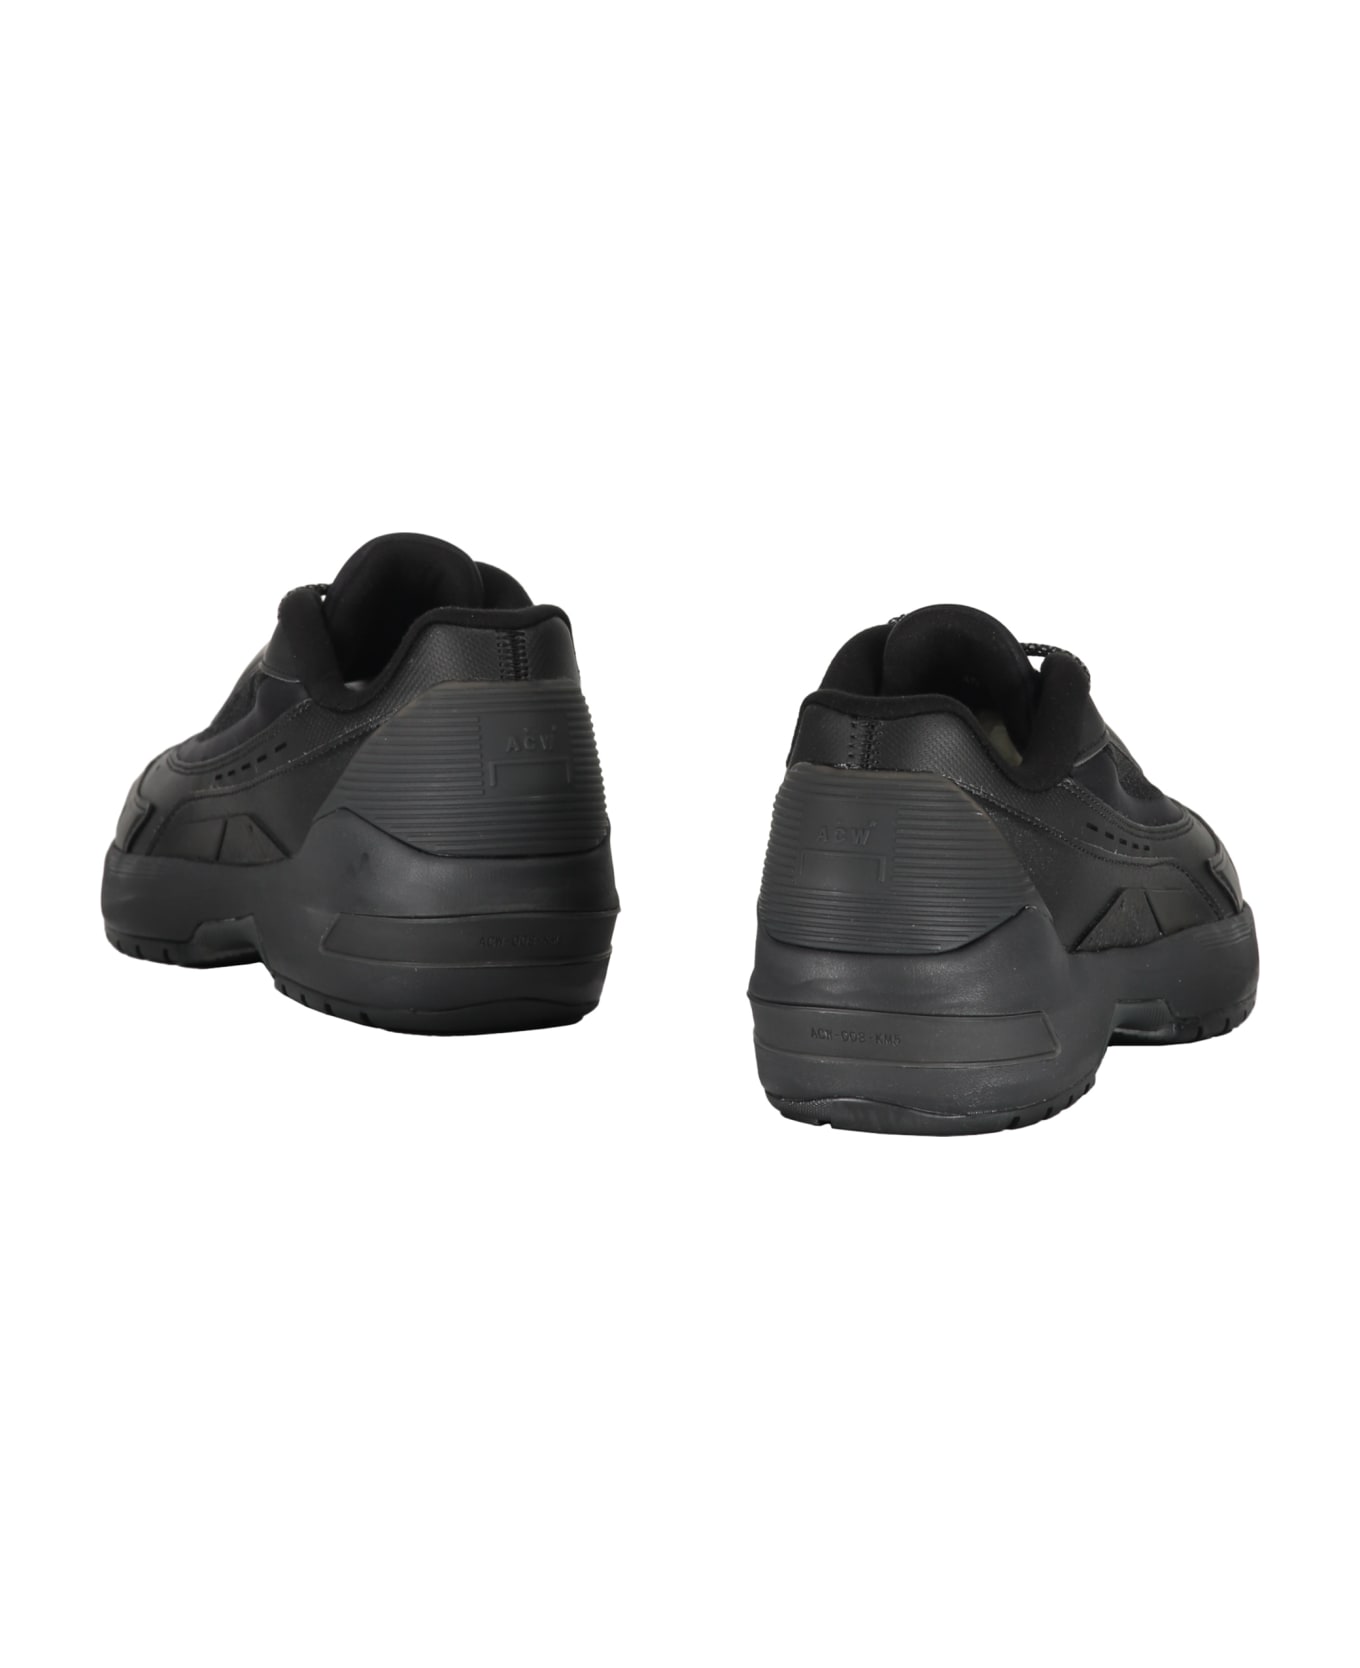 A-COLD-WALL Low-top Sneakers - black